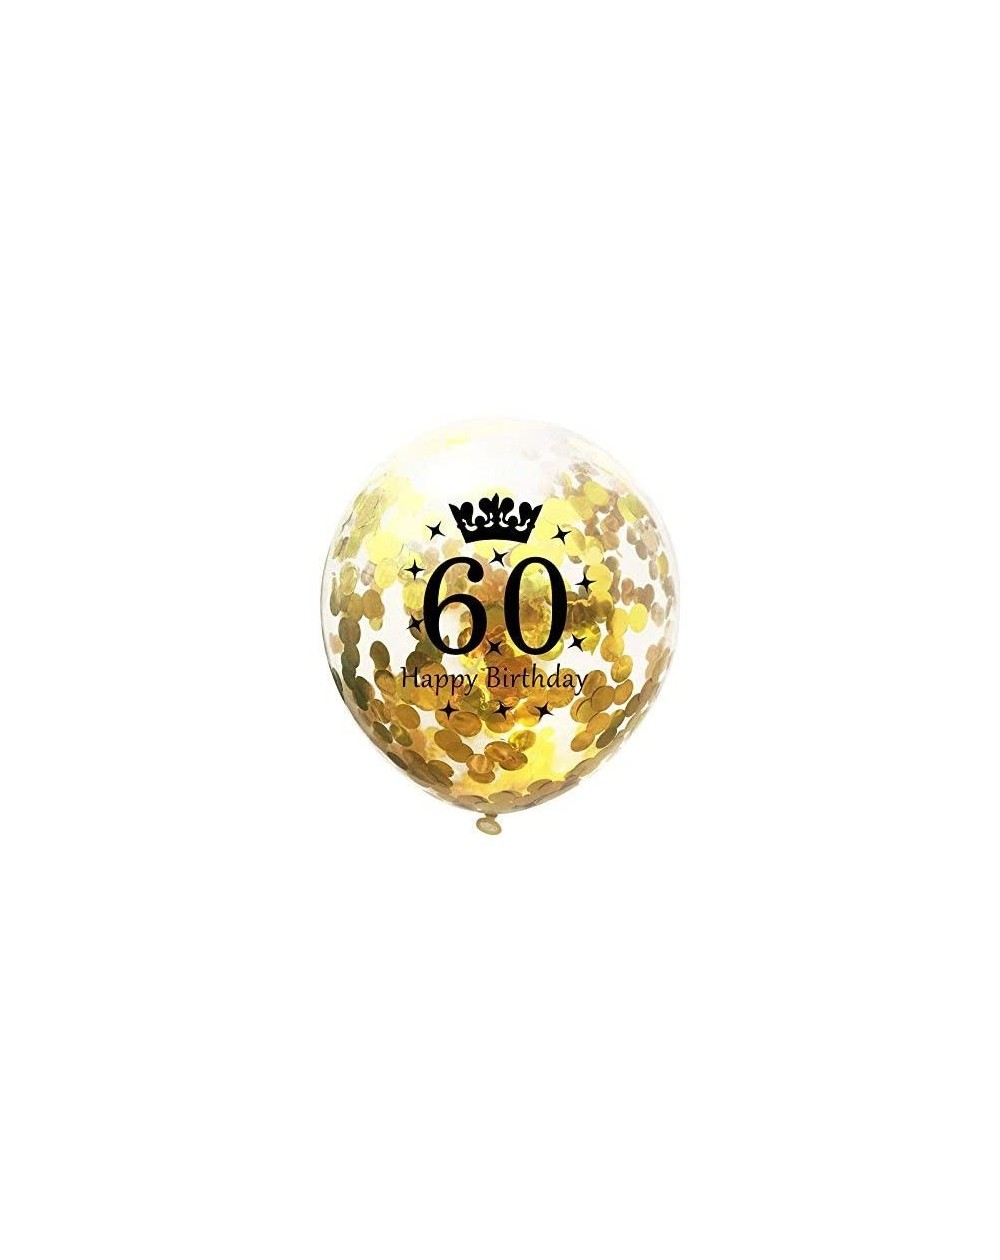 Balloons 10pcs Gold Confetti Balloons 12 inches Happy Birthday Sign Party Balloons with Golden Rose Paper Confetti for 60th A...